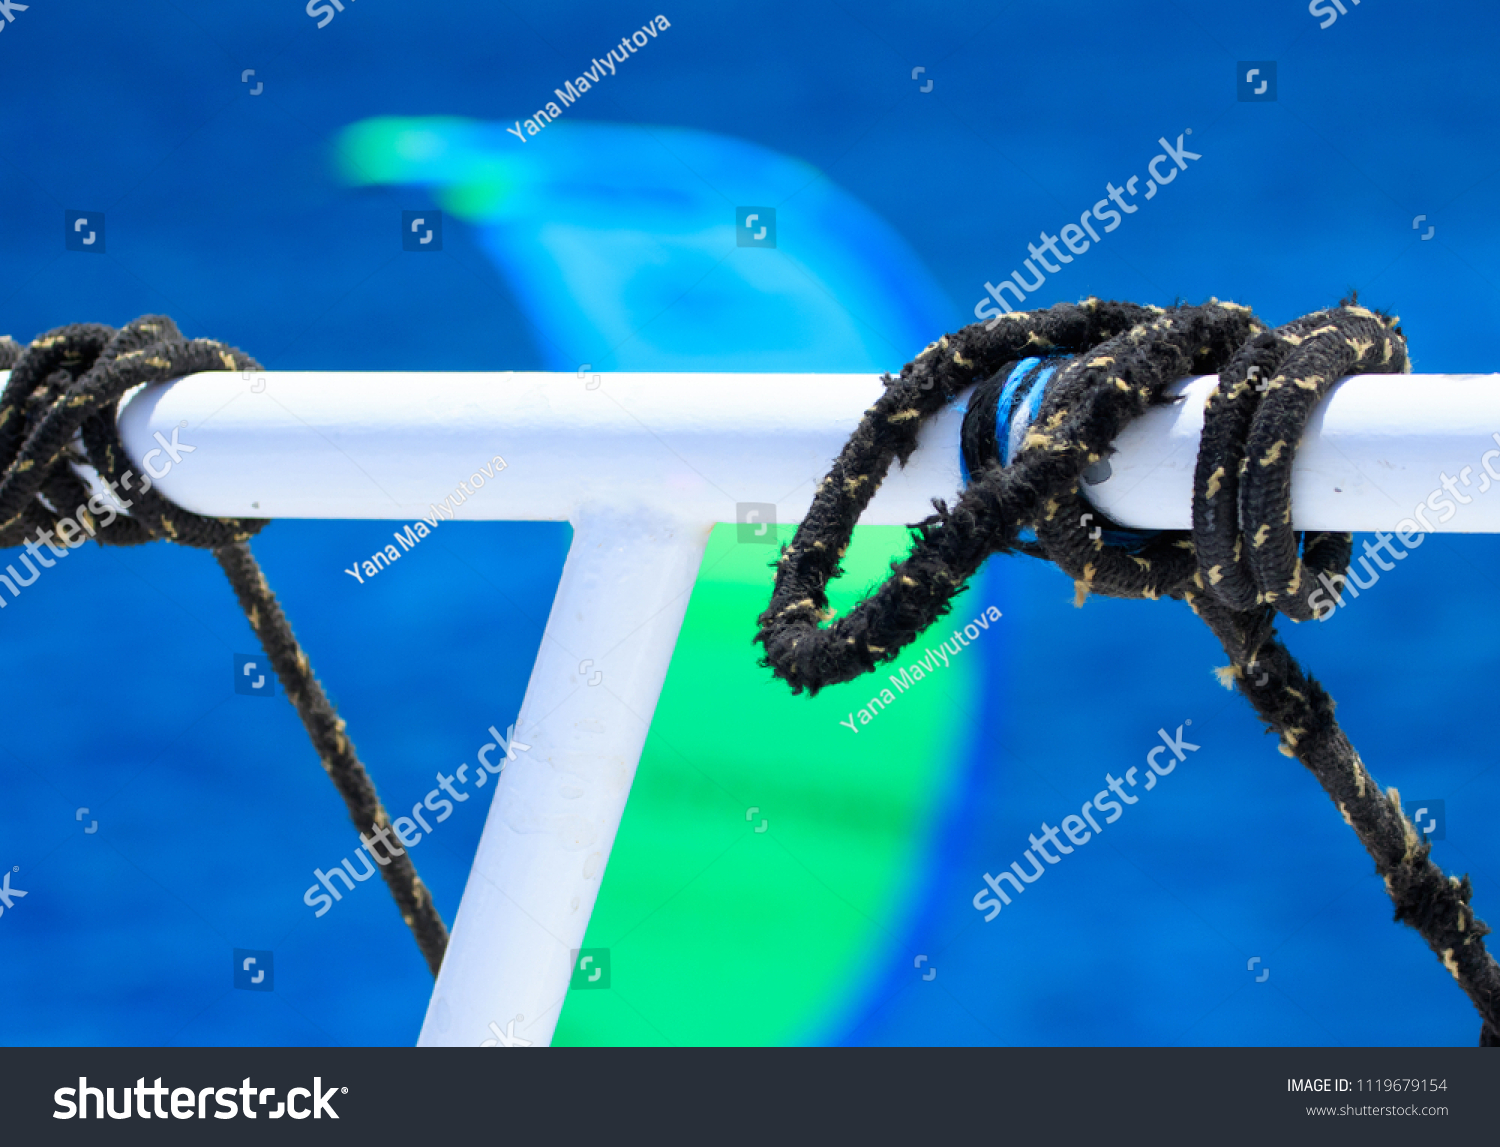 Black sailing ropes crossing in tie knots around boat white tube on blurred bokeh deep blue sea water background, picturesques abstraction eye catching picture for designs prome sail trips tourism #1119679154